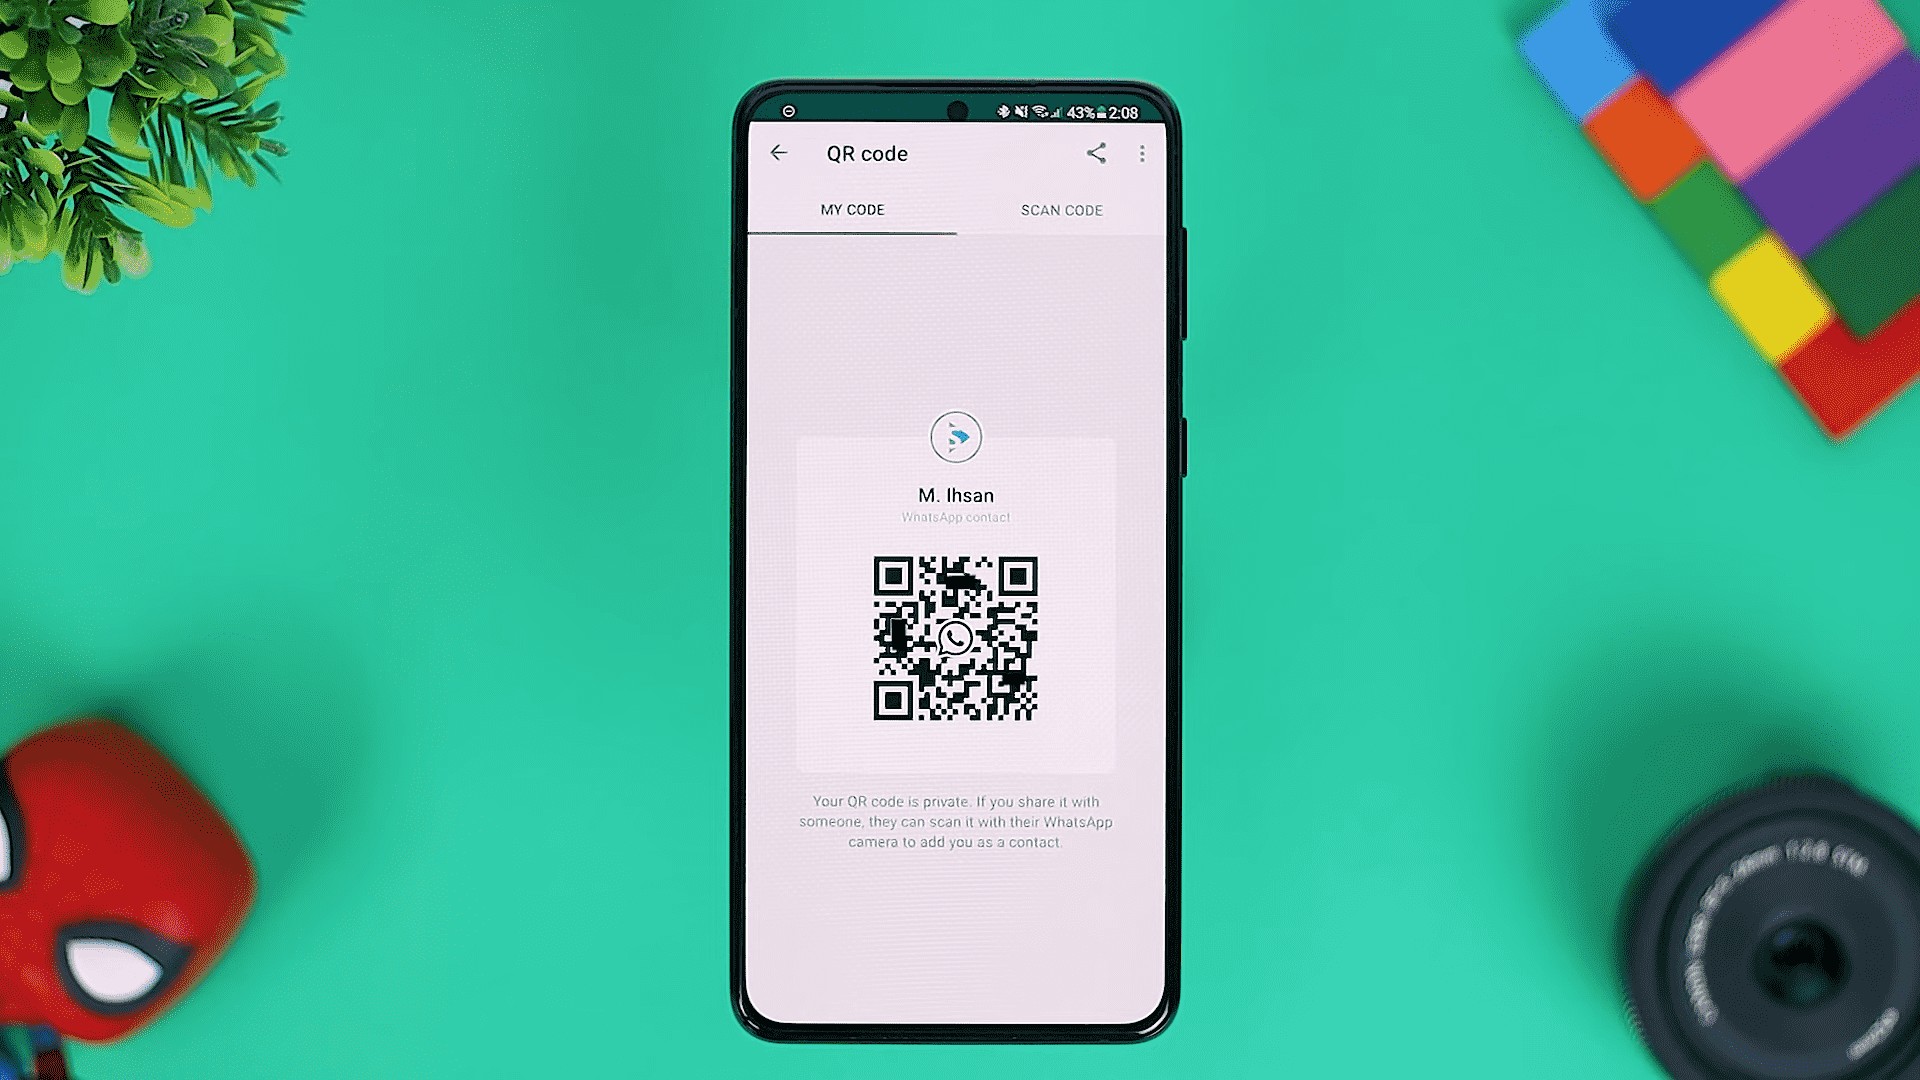 Add New Contact with QR Code